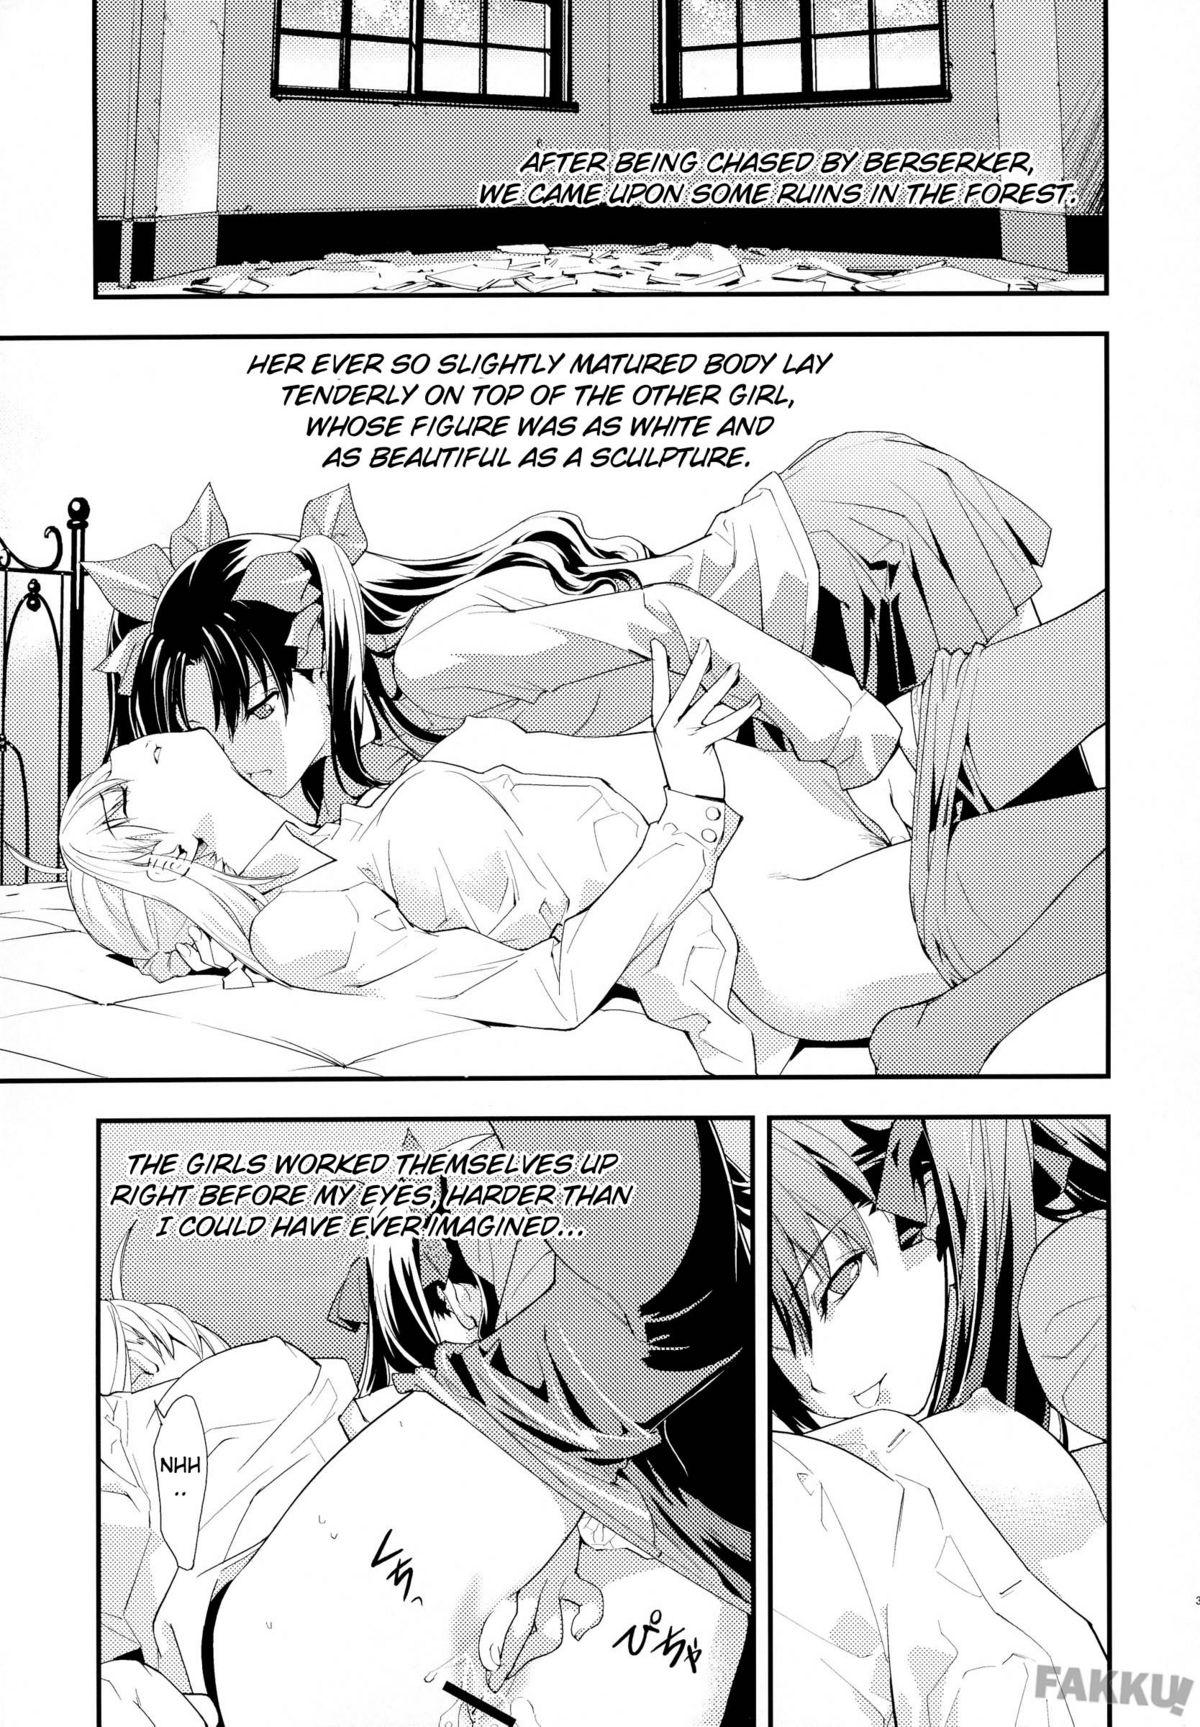 Best Blowjobs Claim - Fate stay night Humiliation - Page 5